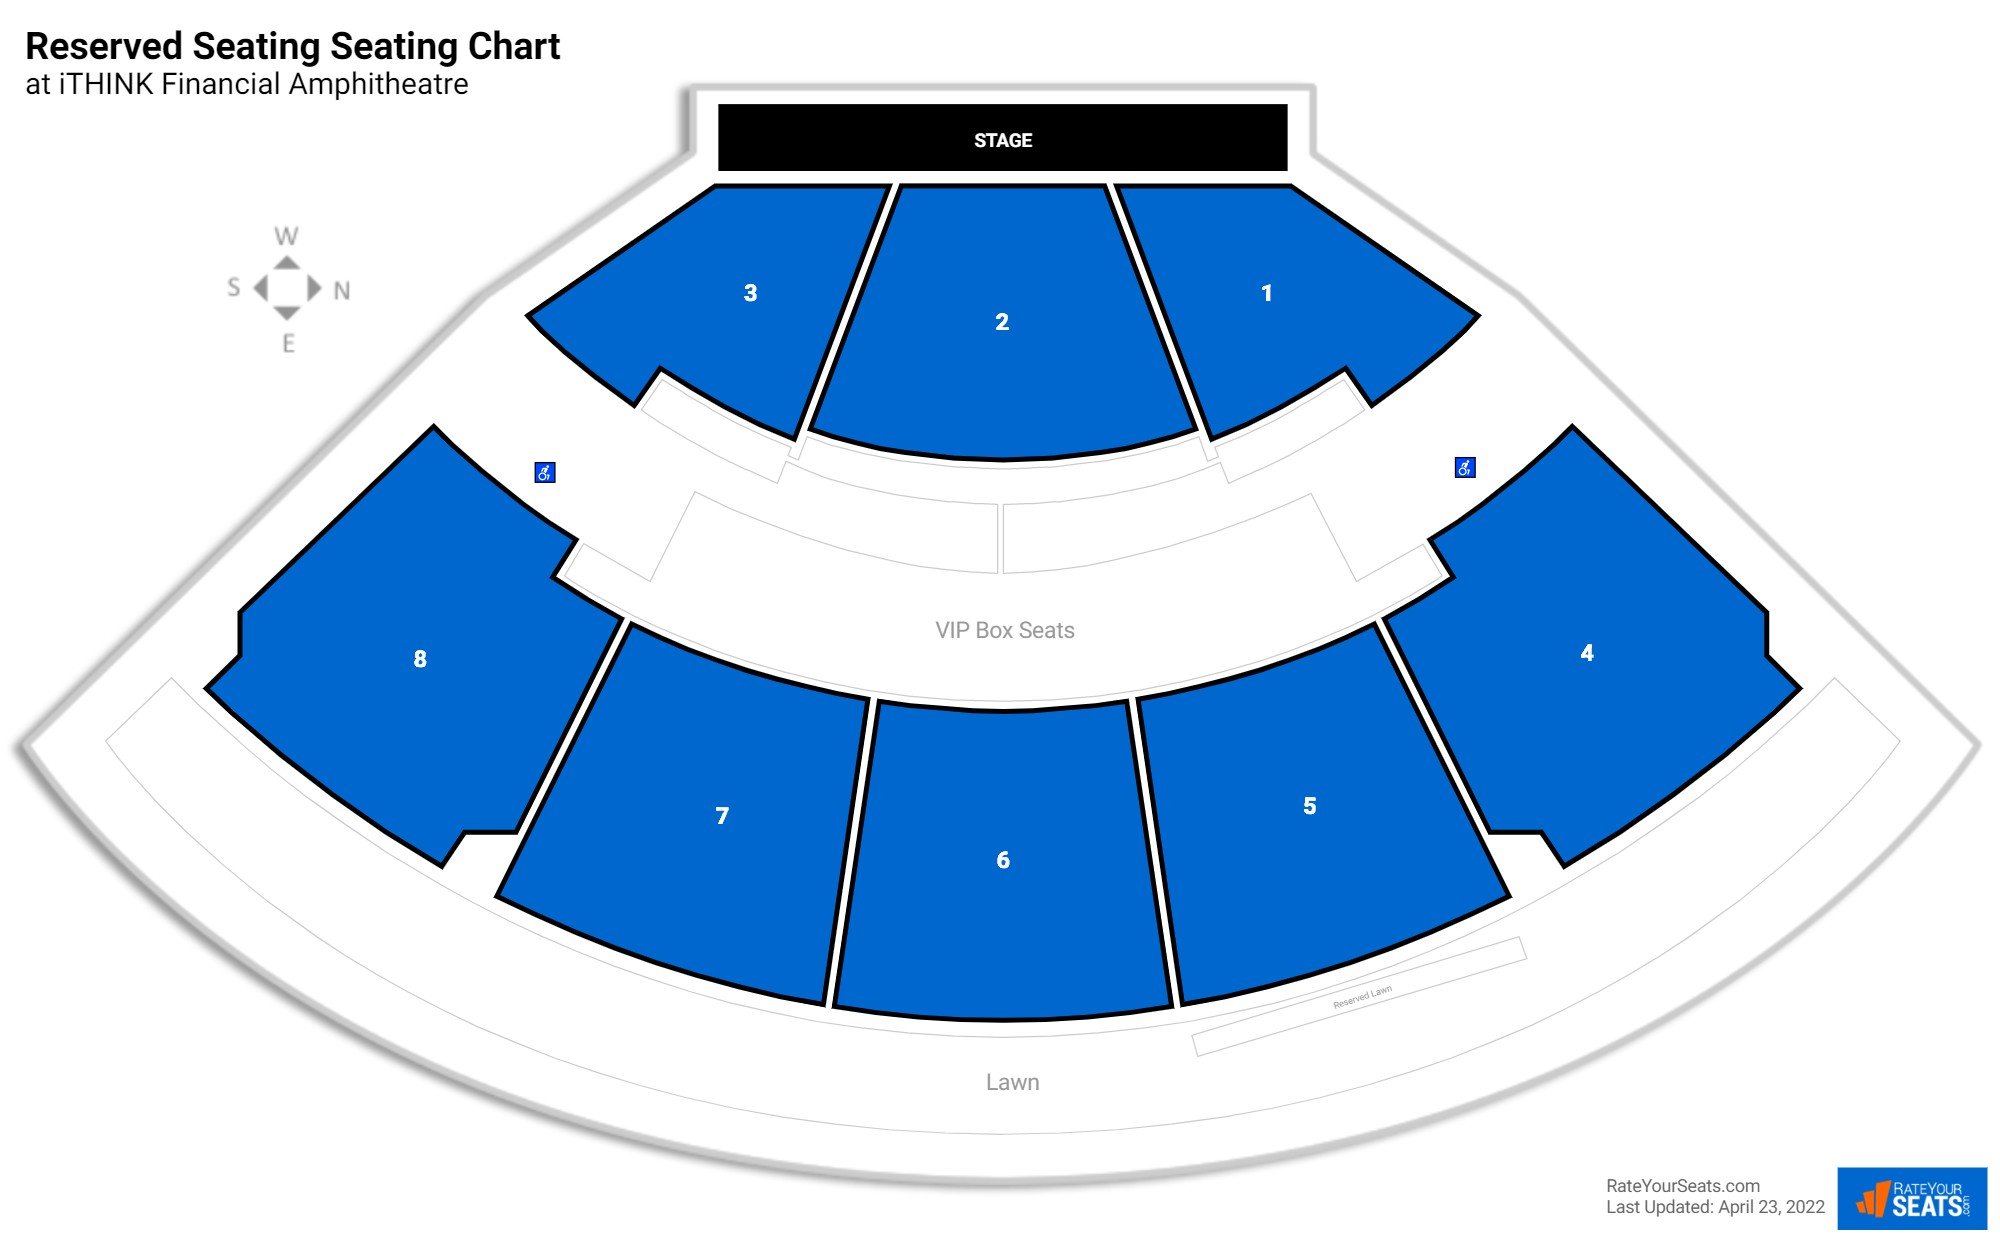 Concert Reserved Seating Seating Chart at iTHINK Financial Amphitheatre